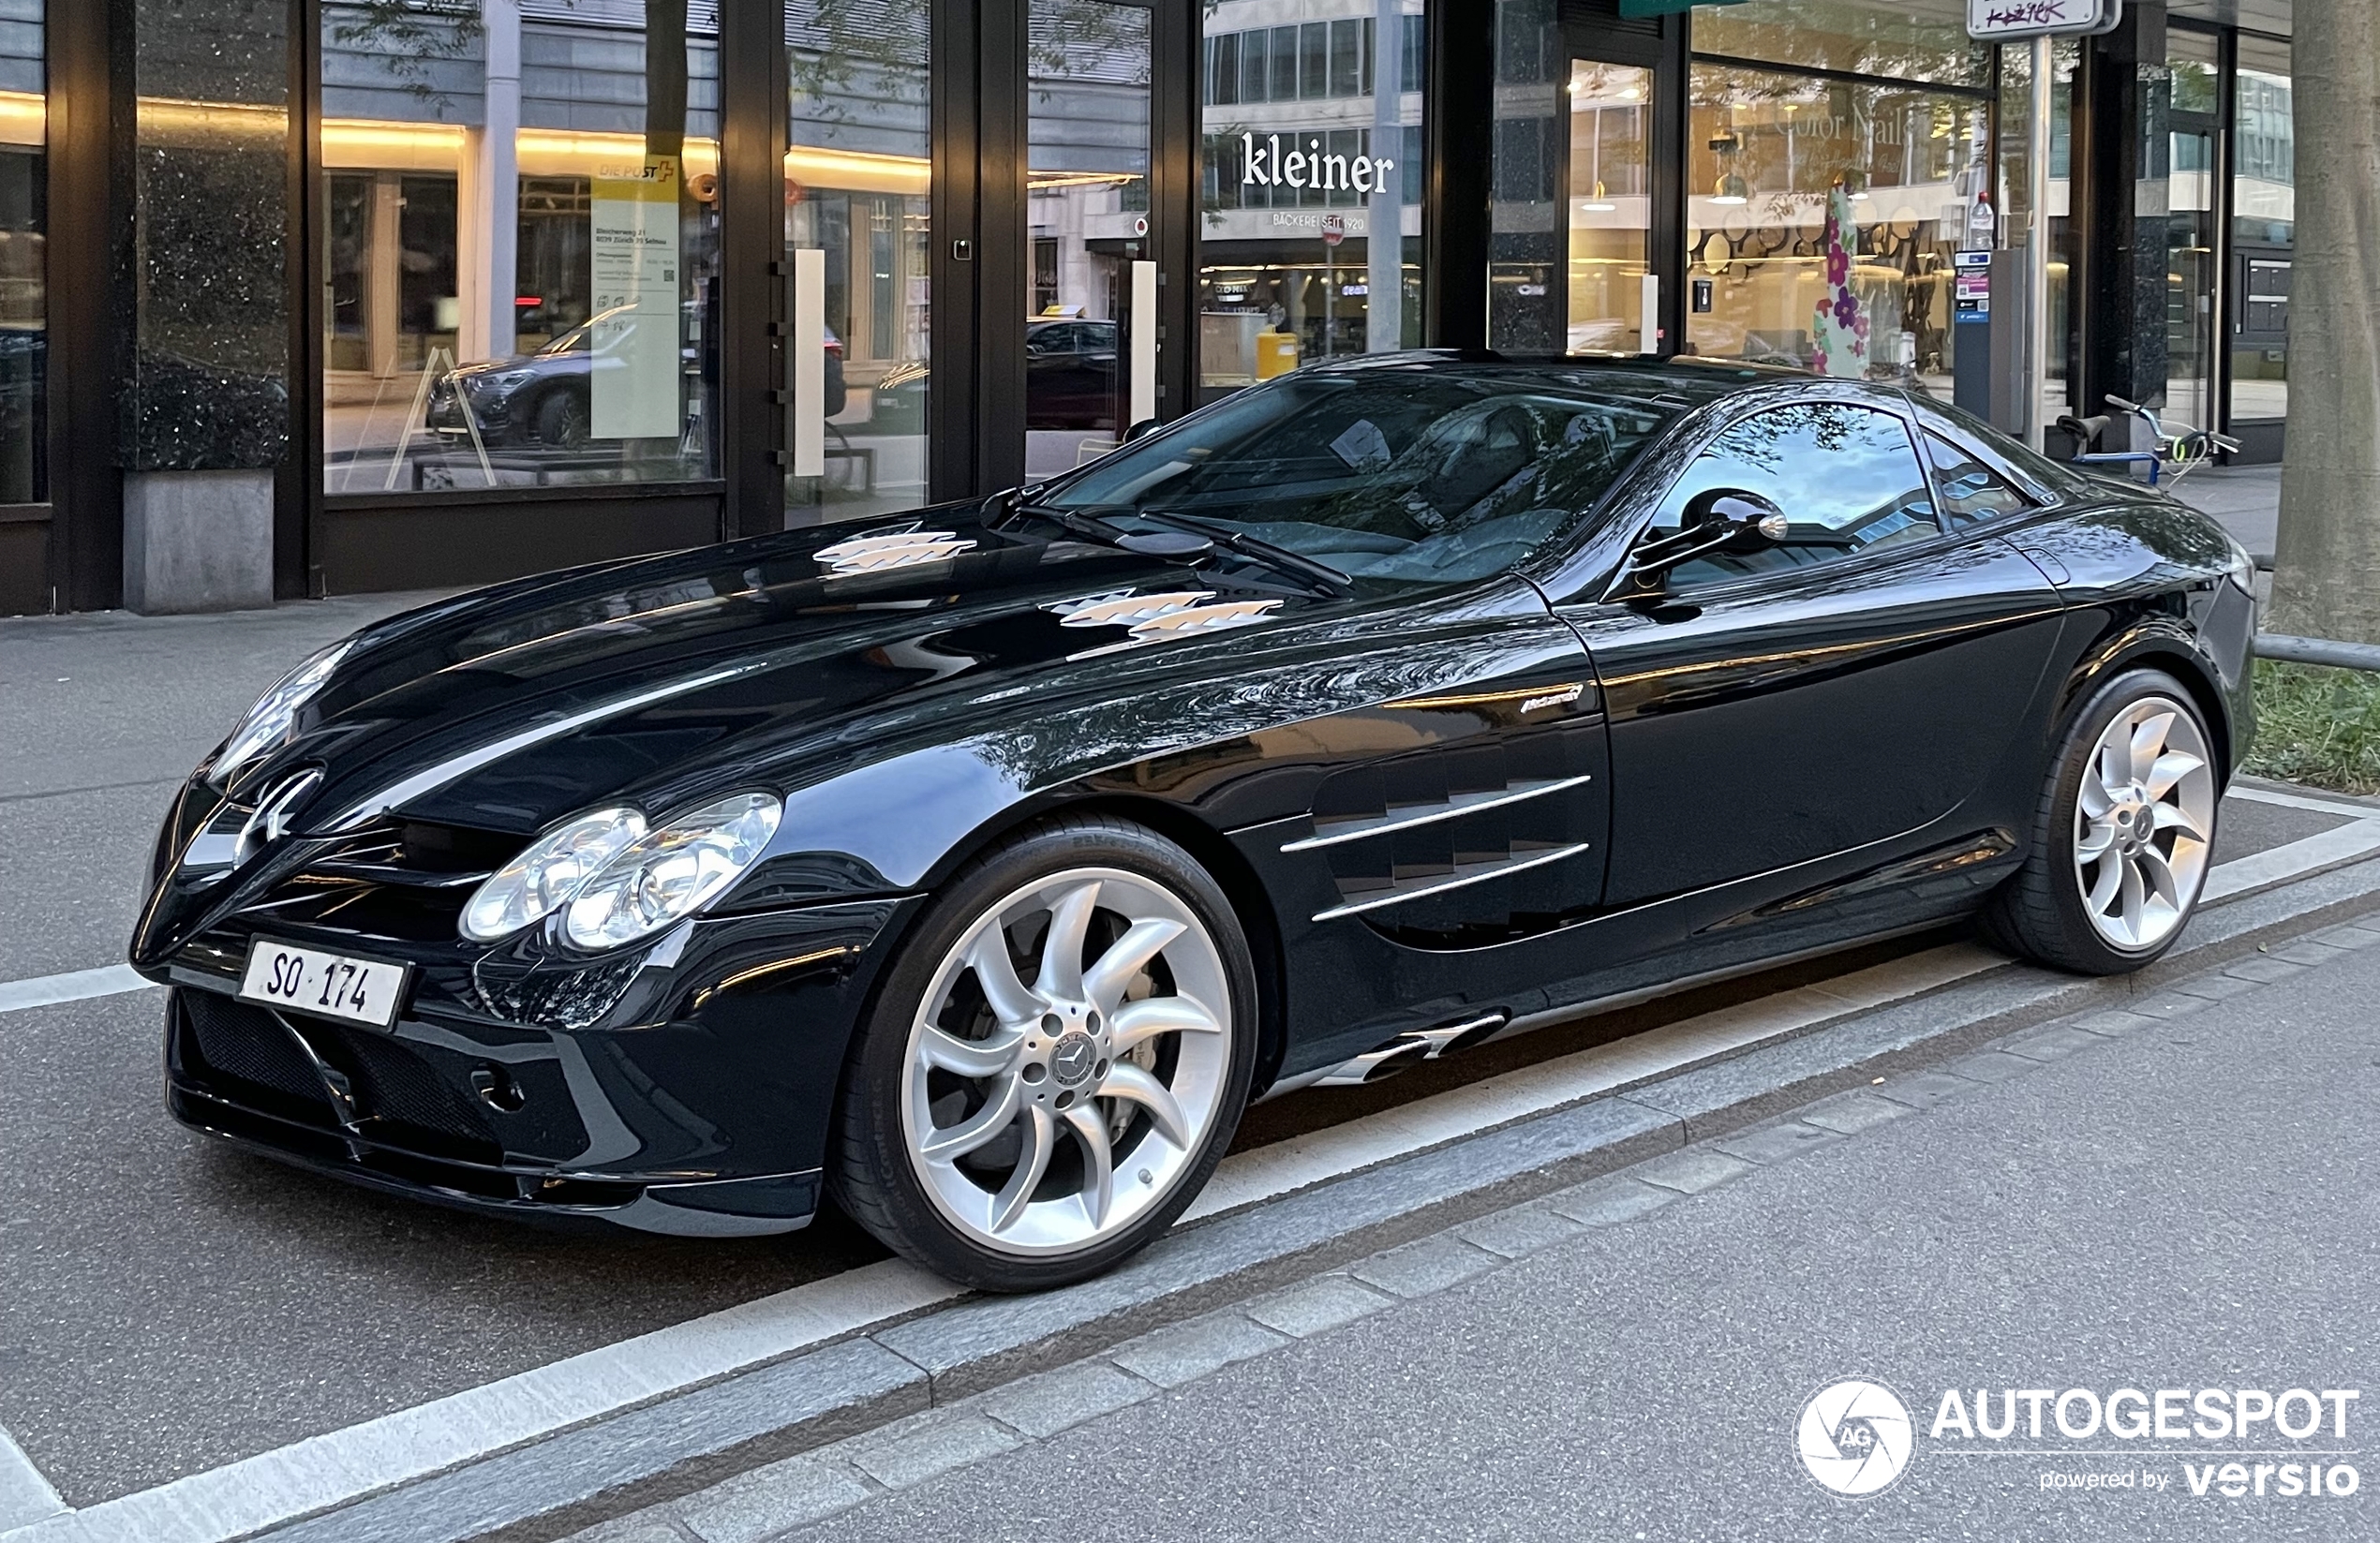 A beautiful SLR shows up in Zürich